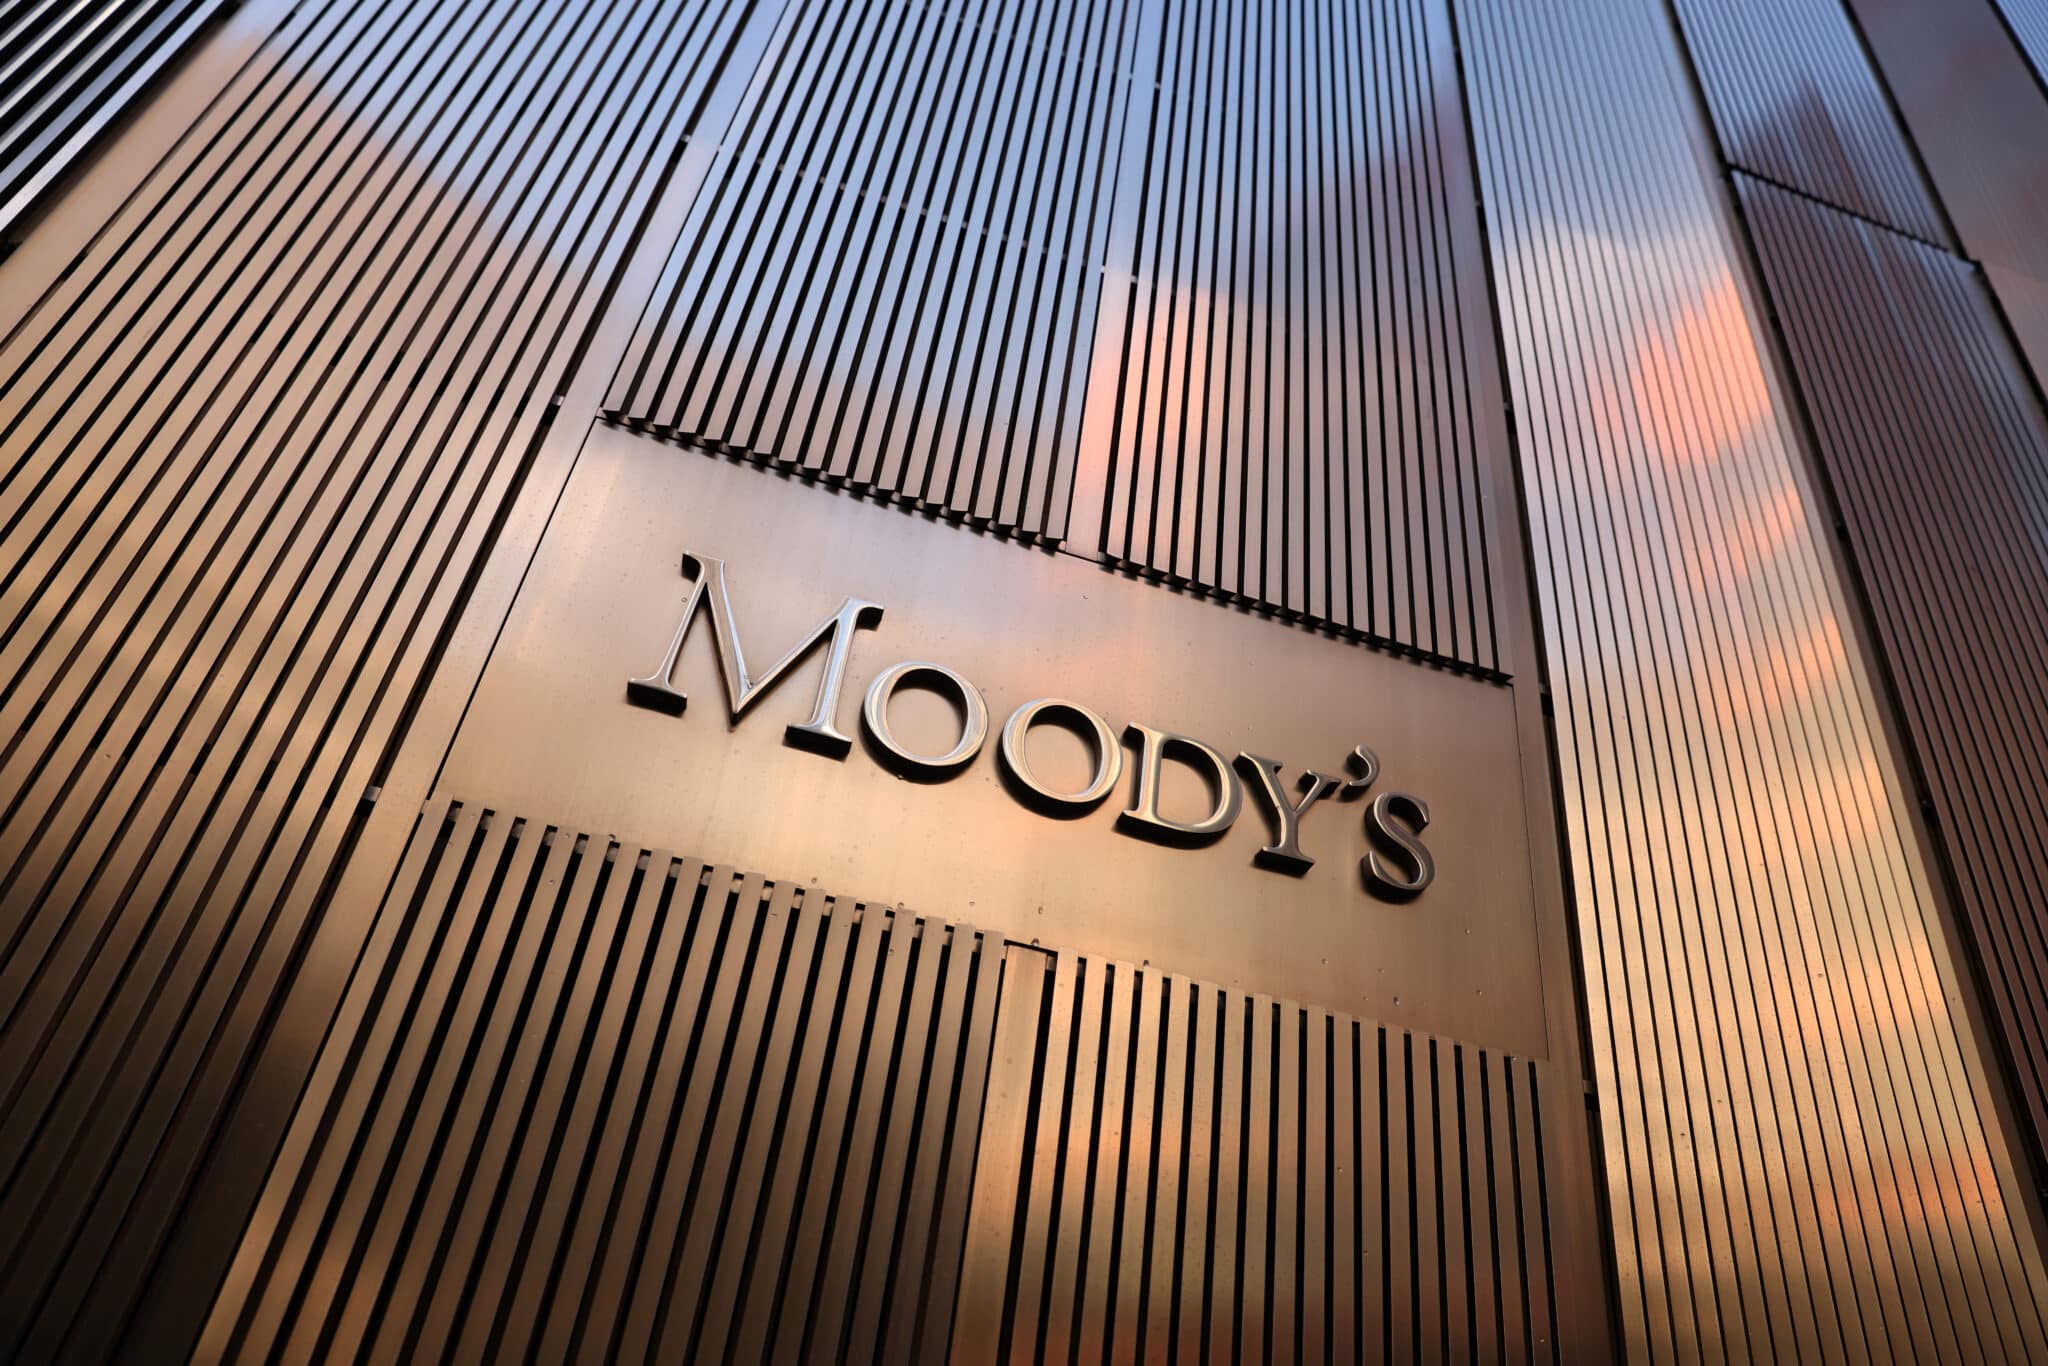 Moody’s: West African countries’ exit from regional bloc could hinder growth